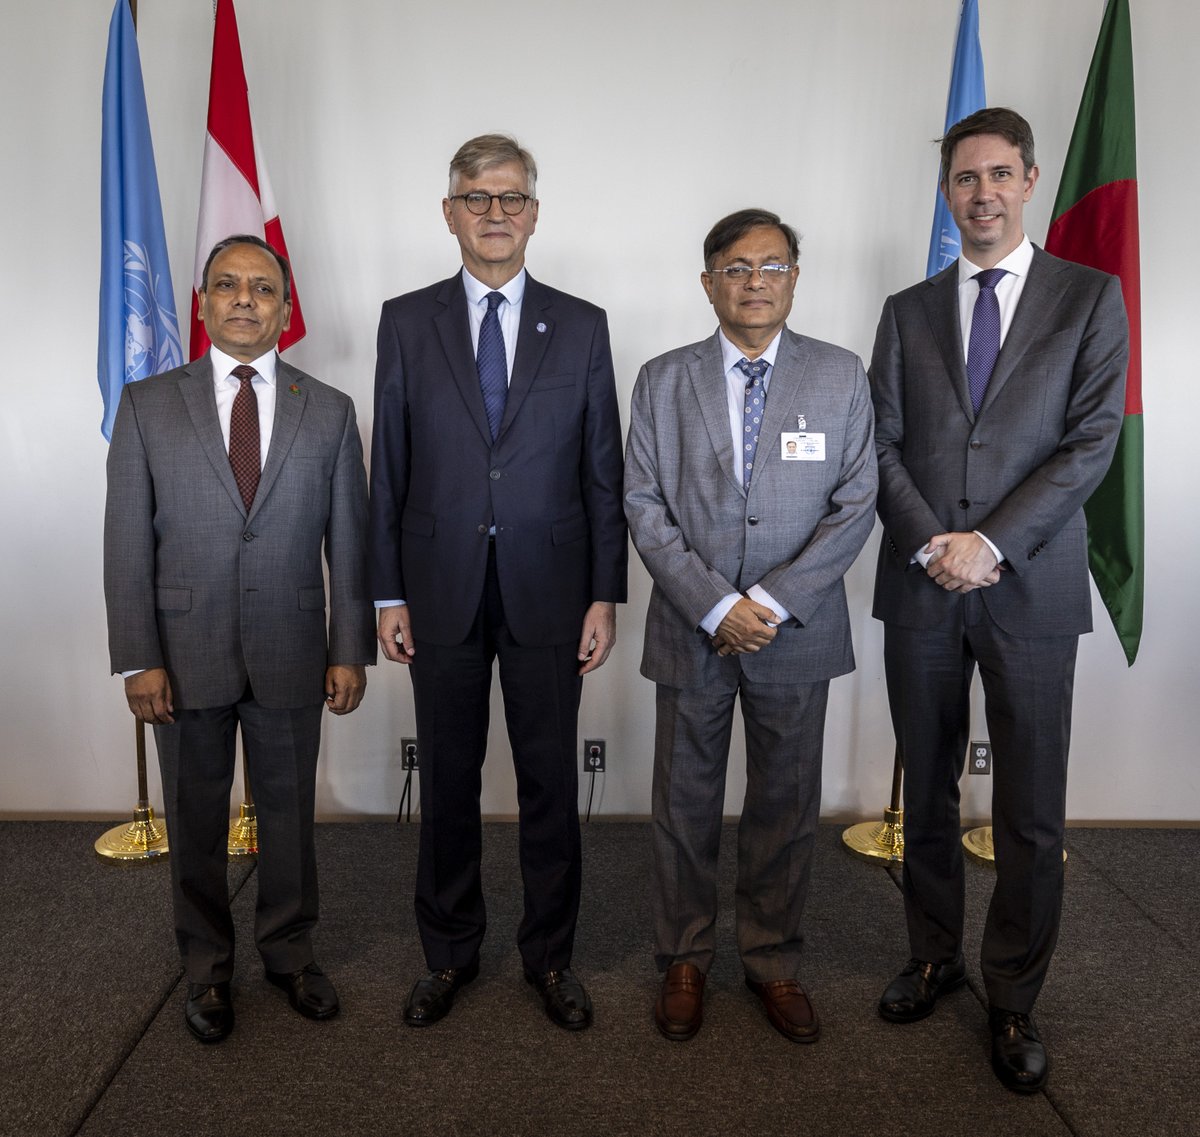 Honored to co-host together with #Bangladesh a reception on the occasion of the International Day of UN Peacekeepers. Austria has a long tradition in peacekeeping, with over 100,000 Austrians contributing to global peace and security since 1960.